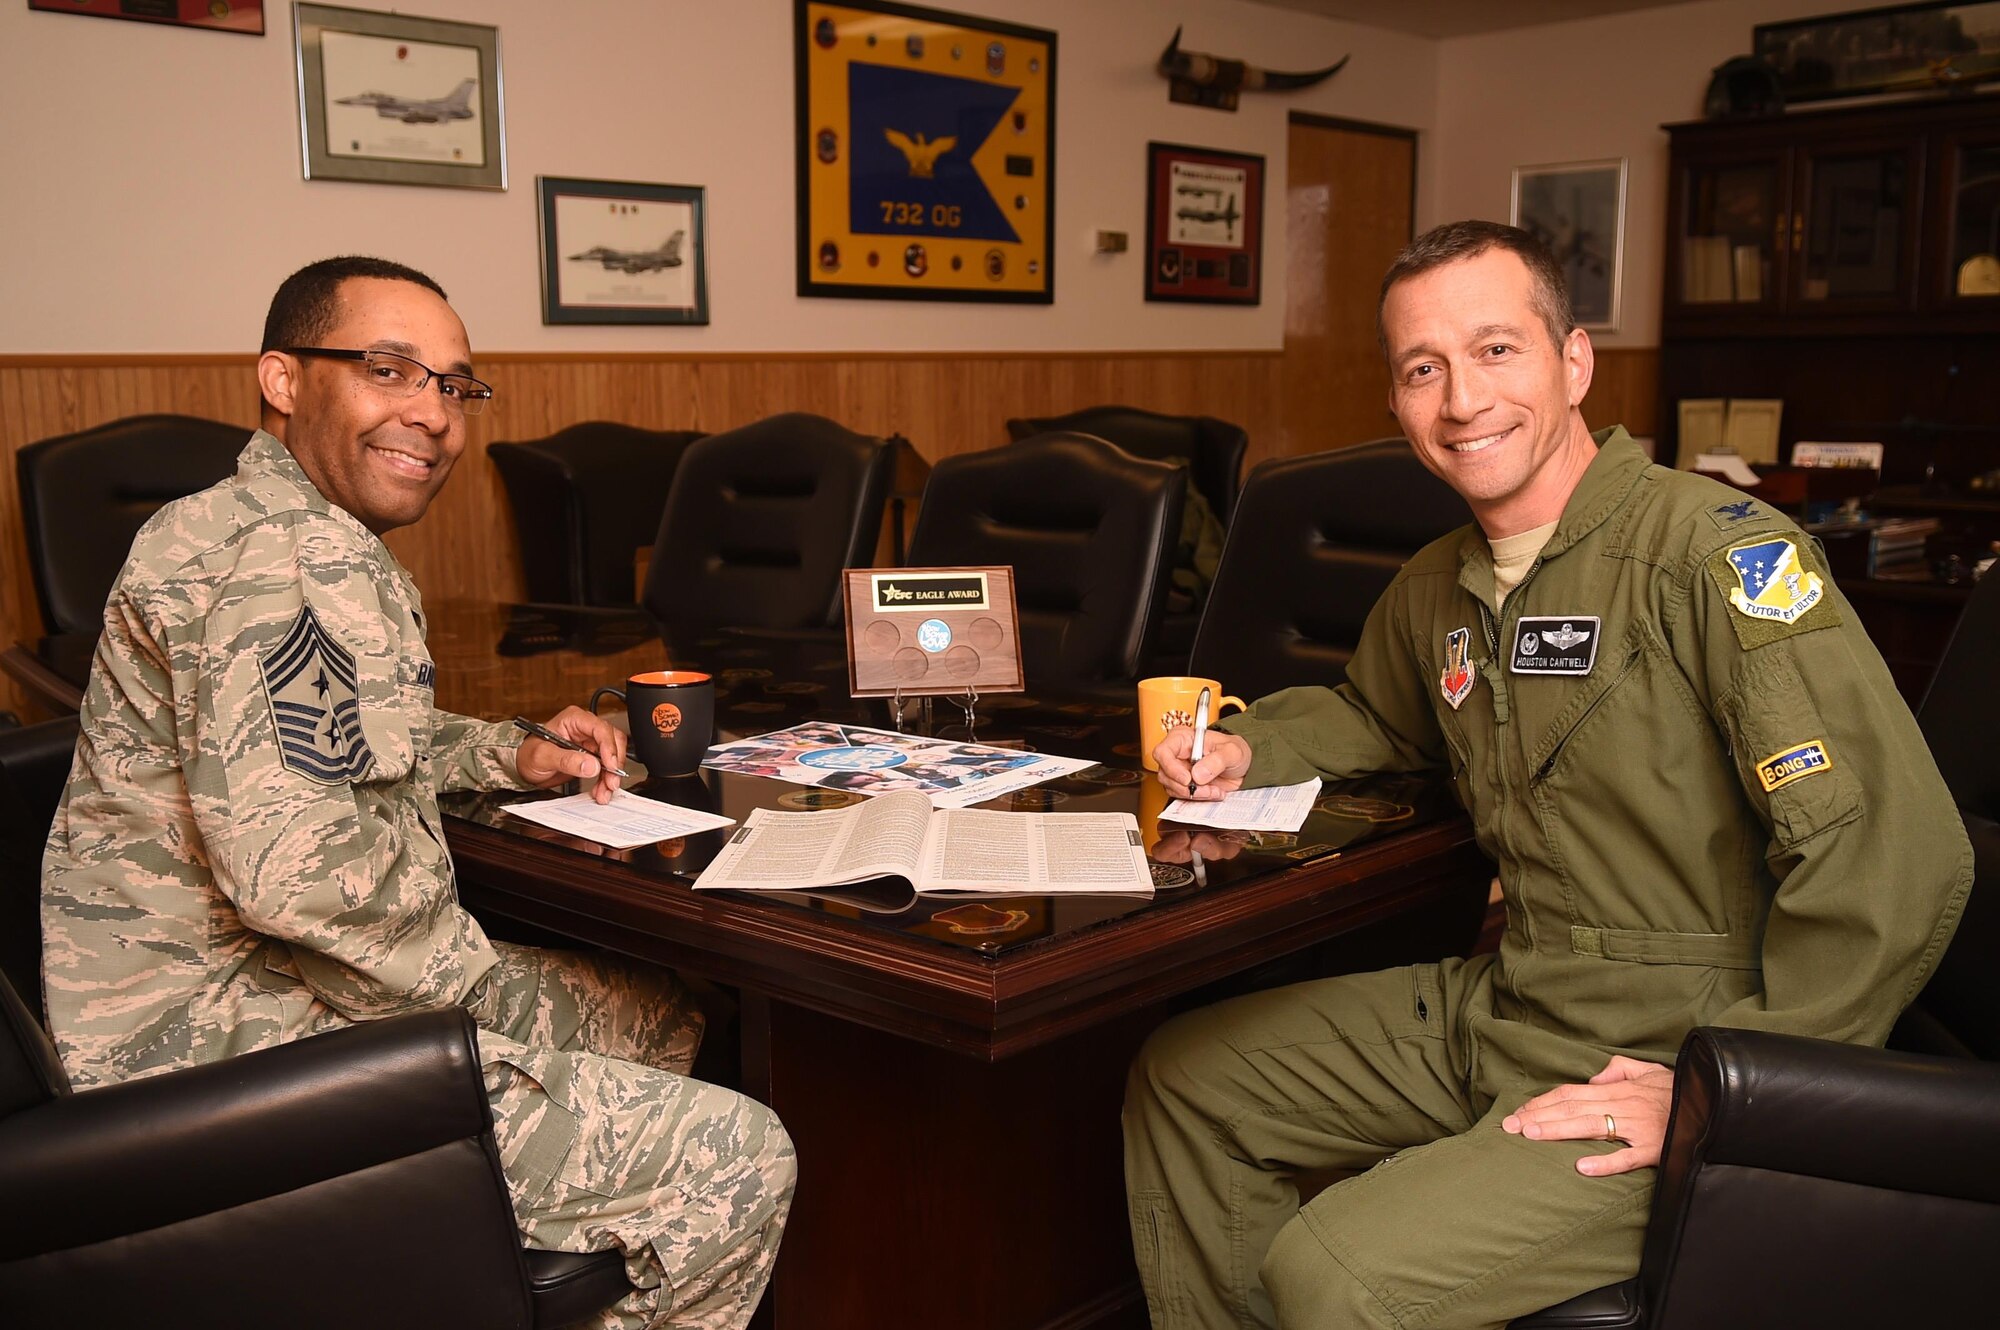 Col. Houston Cantwell, the 49th Wing commander, signs his Combined Federal Campaign donation slip on Dec. 1, 2016, Holloman AFB, N.M. The mission of the CFC is to promote and support philanthropy through a program that is employee focused, cost-efficient, and effective in providing all federal employees the opportunity to improve the quality of life for all. CFC is the world’s largest and most successful annual workplace charity campaign, with more than 150 CFC campaigns throughout the country and internationally to help to raise millions of dollars each year. Pledges made by federal civilian, postal and military donors during the campaign season (September 1st to December 15th) support eligible non-profit organizations that provide health and human service benefits throughout the world. For more information and how to contribute, contact your unit CFC representative or visit the following link: https://www.opm.gov/combined-federal-campaign/ (U.S. Air Force photo by Tech. Sgt. Amanda Junk)